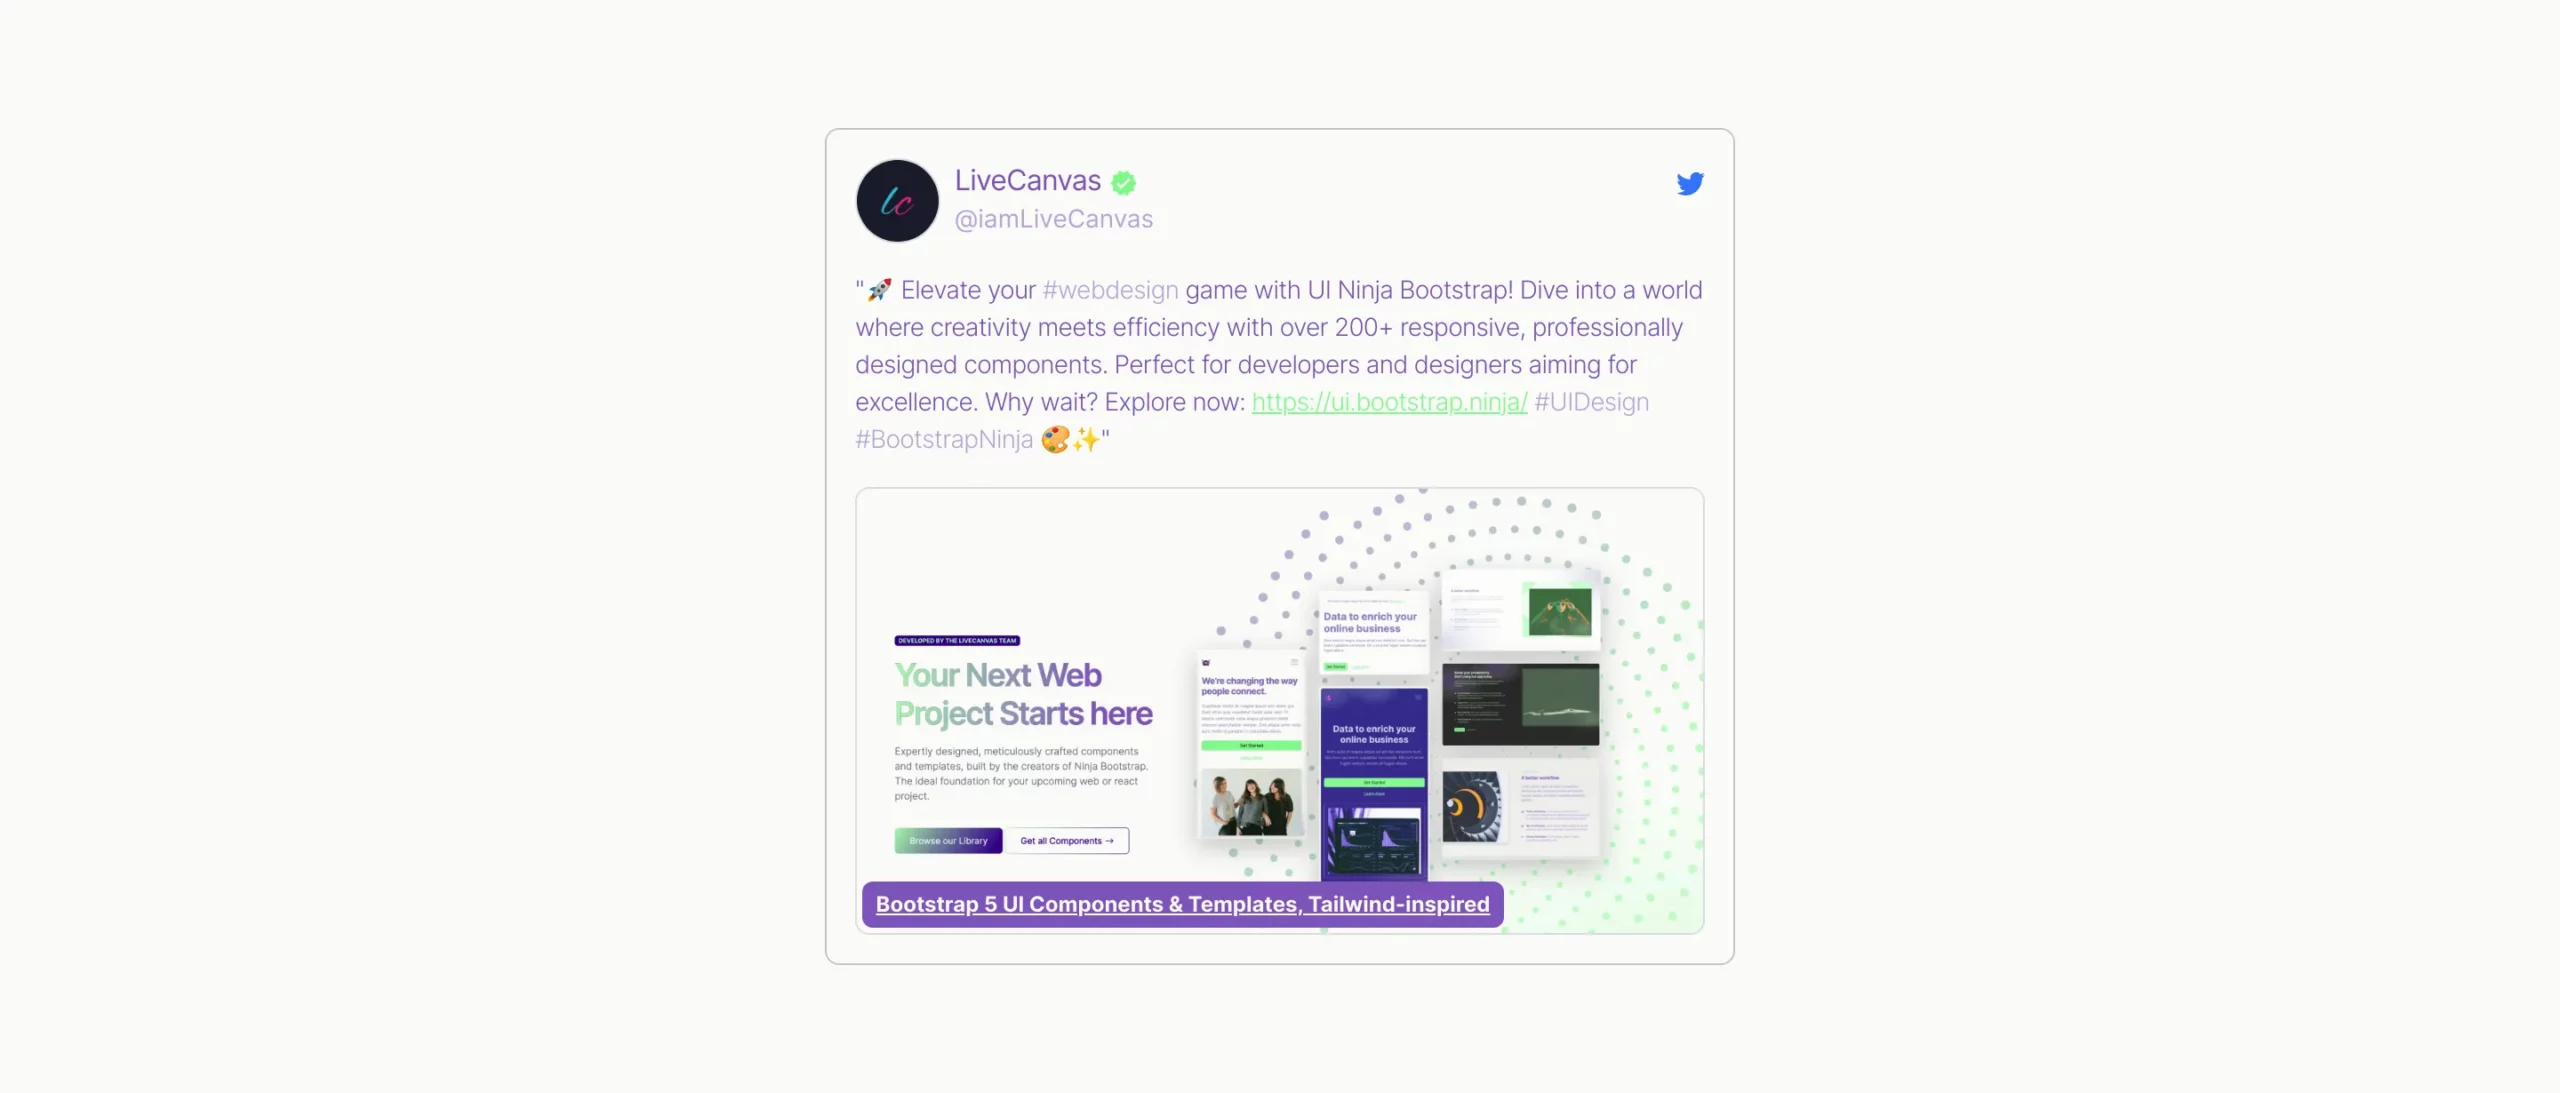 Tweet Card With Image and Link Bootstrap 5 components